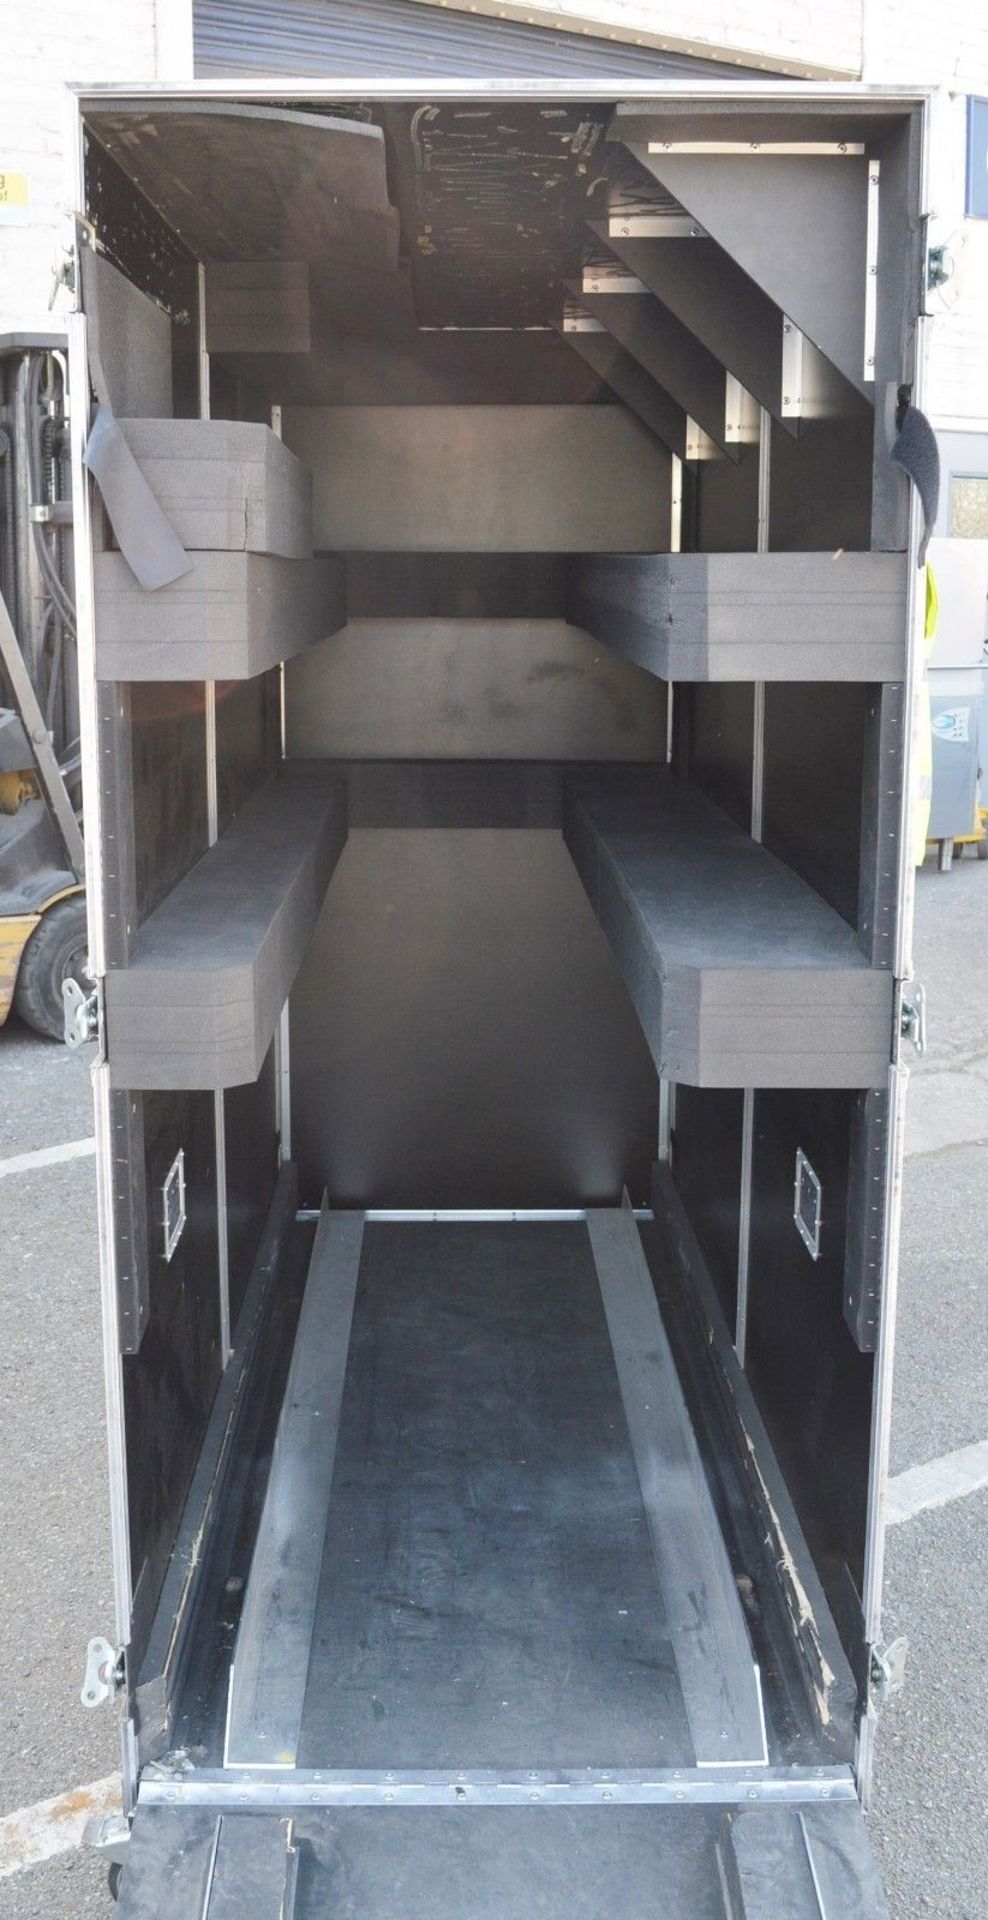 1 x Large Flight Case With Castors and Ramp For Easy Loading - H188 x W200 x D79 cms - CL011 - - Image 2 of 11